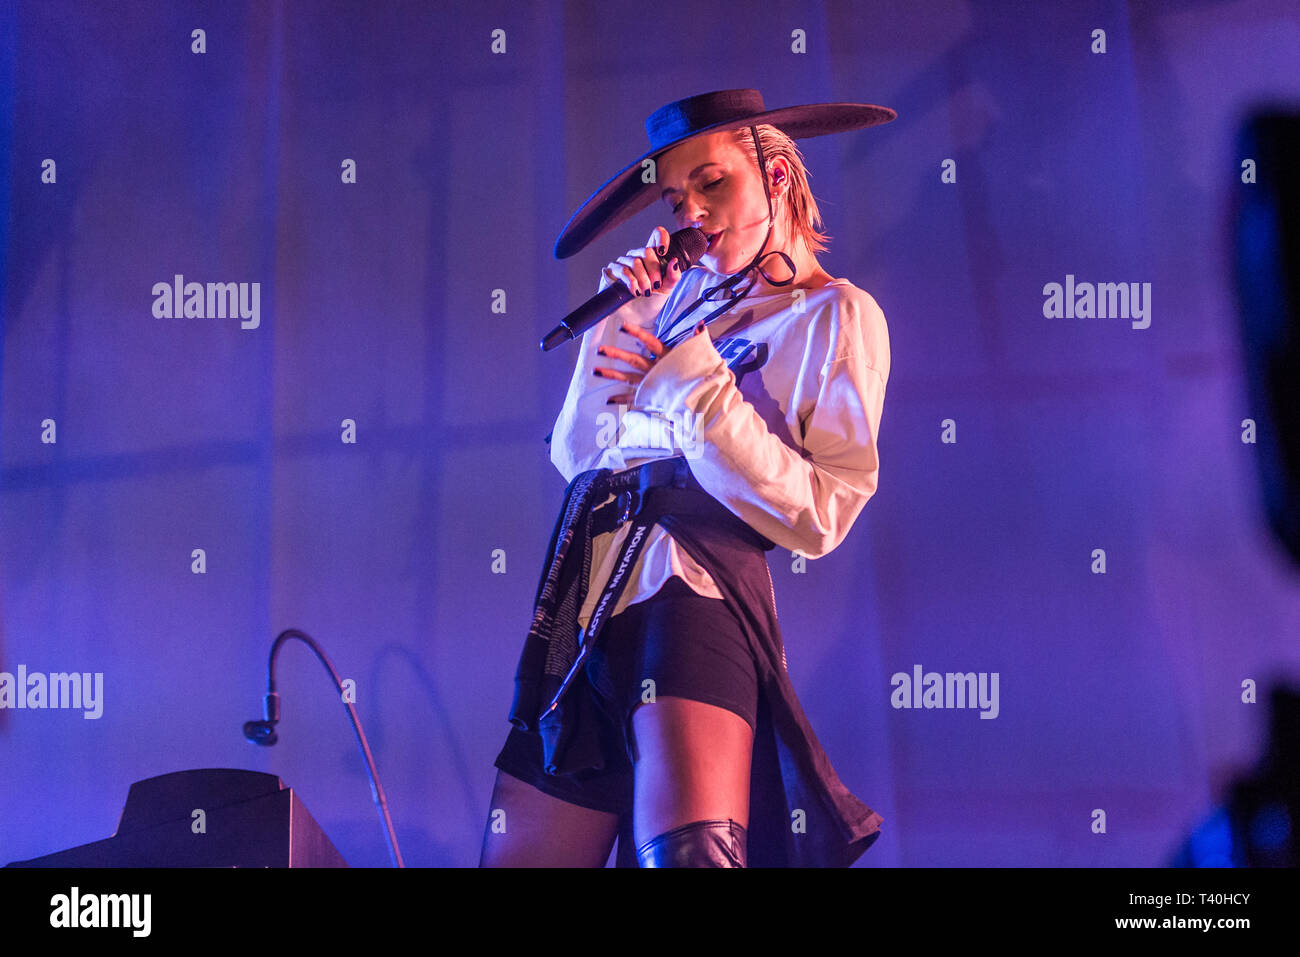 Denmark, Copenhagen - December 1, 2018. The Danish singer, songwriter and musician MØ performs a live concert during at Royal Arena in Copanhagen. (Photo credit: Gonzales Photo - Bo Kallberg Stock Photo Alamy